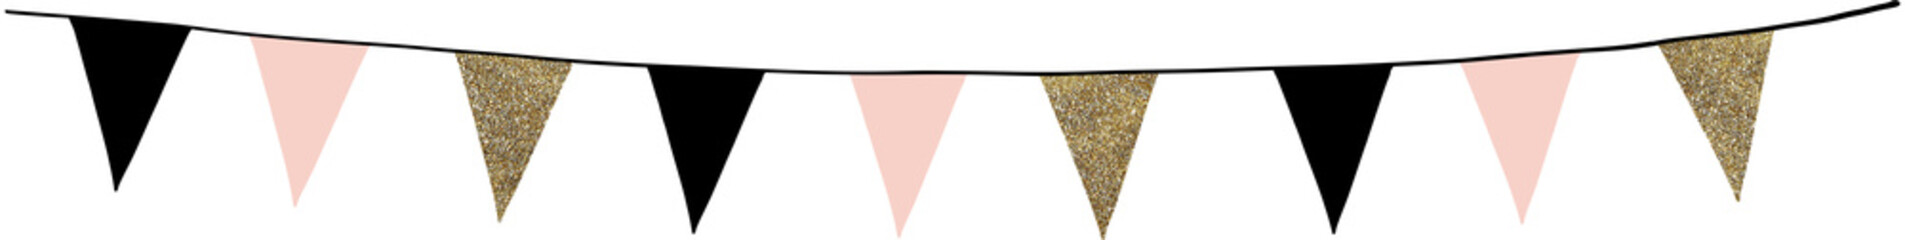 Birthday party decoration. Carnival, New Year garland.  Single string of black, golden, pink flags isolated on white background. Festive frame, web banner. Glitter textile, paper pennants. Illustratio